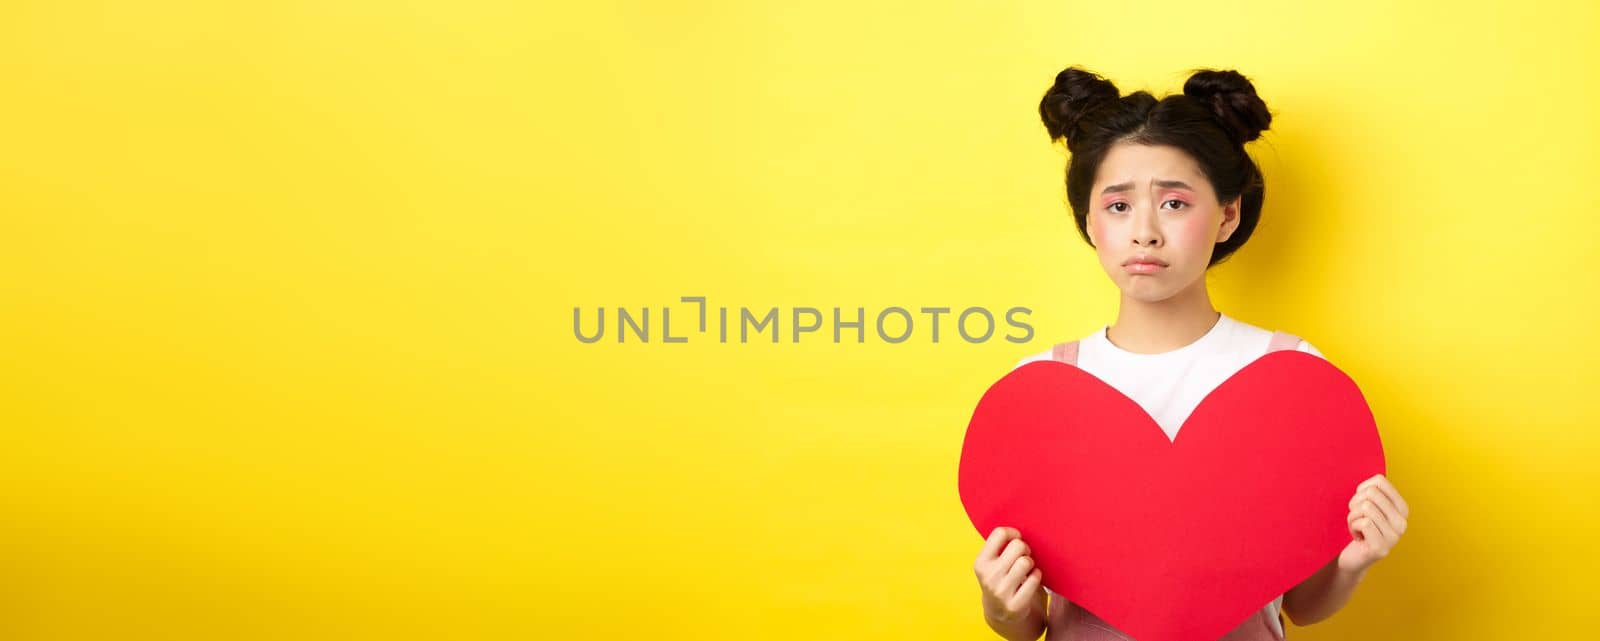 Heartbroken asian woman showing big red heart cutout and looking sad, feeling lonely on lovers day, showing valentine card at camera, yellow background.